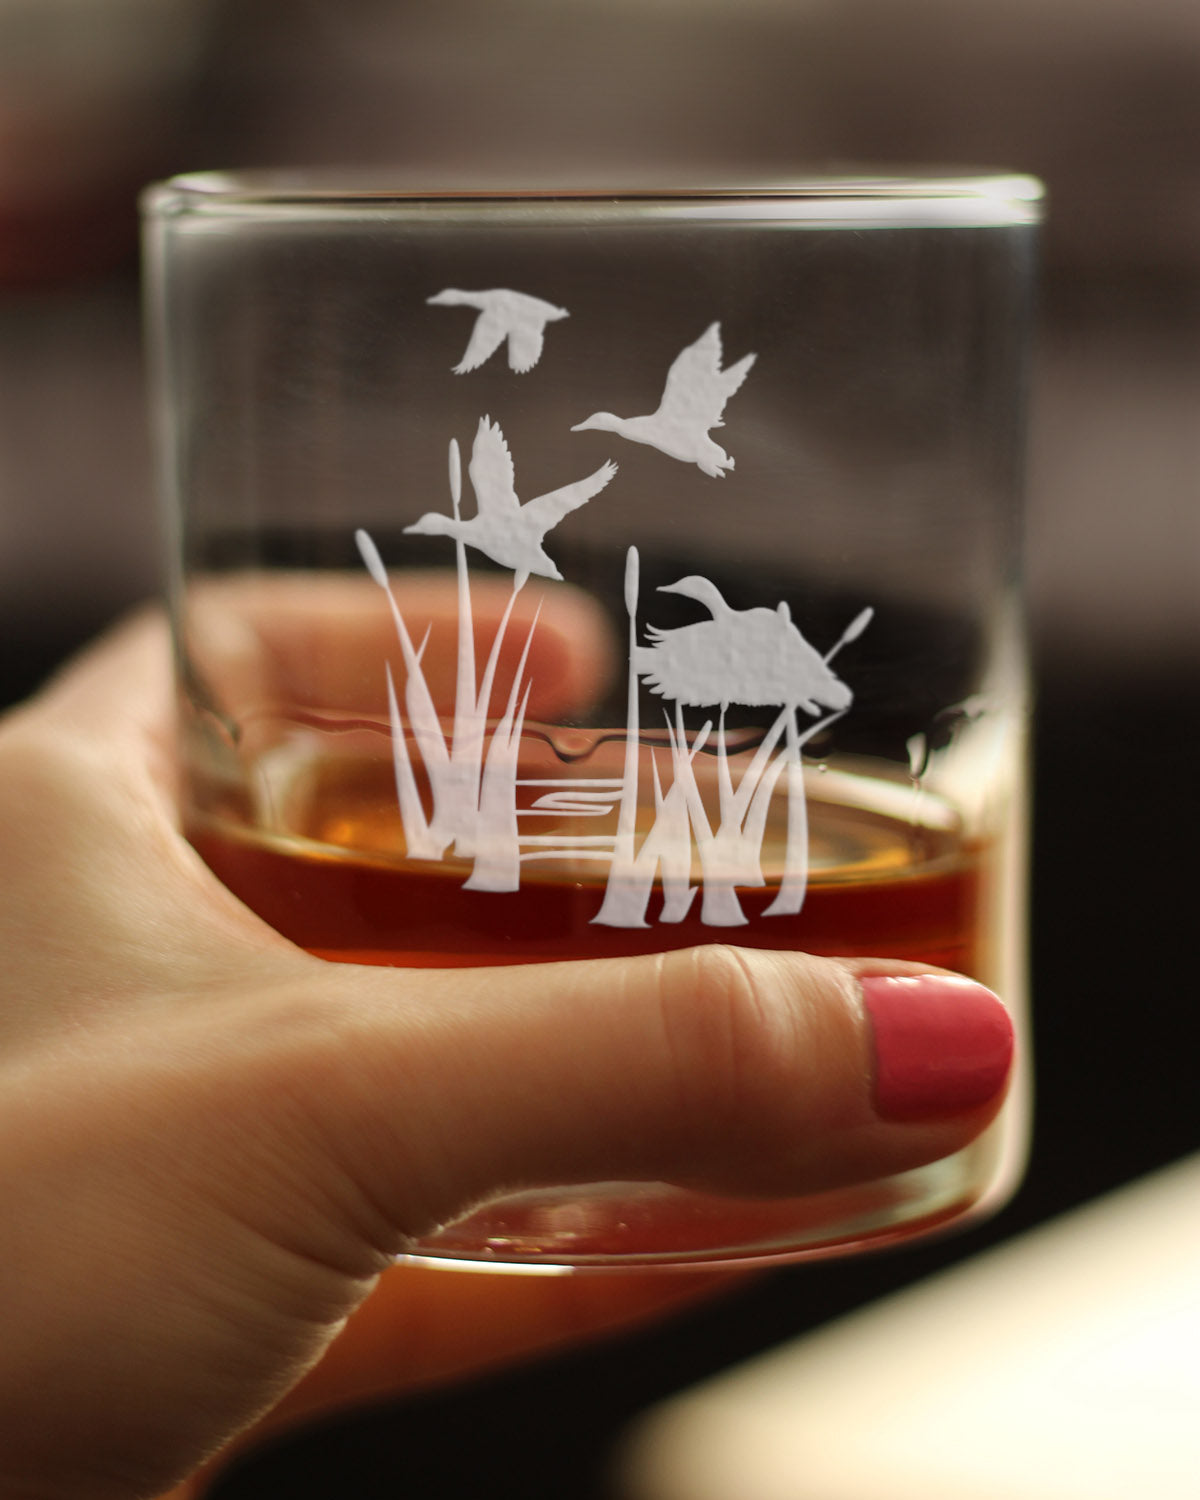 Duck Pond Whiskey Rocks Glass - Cabin Themed Gifts or Rustic Decor for Men and Women - Fun Whisky Drinking Tumbler - 10.25 oz